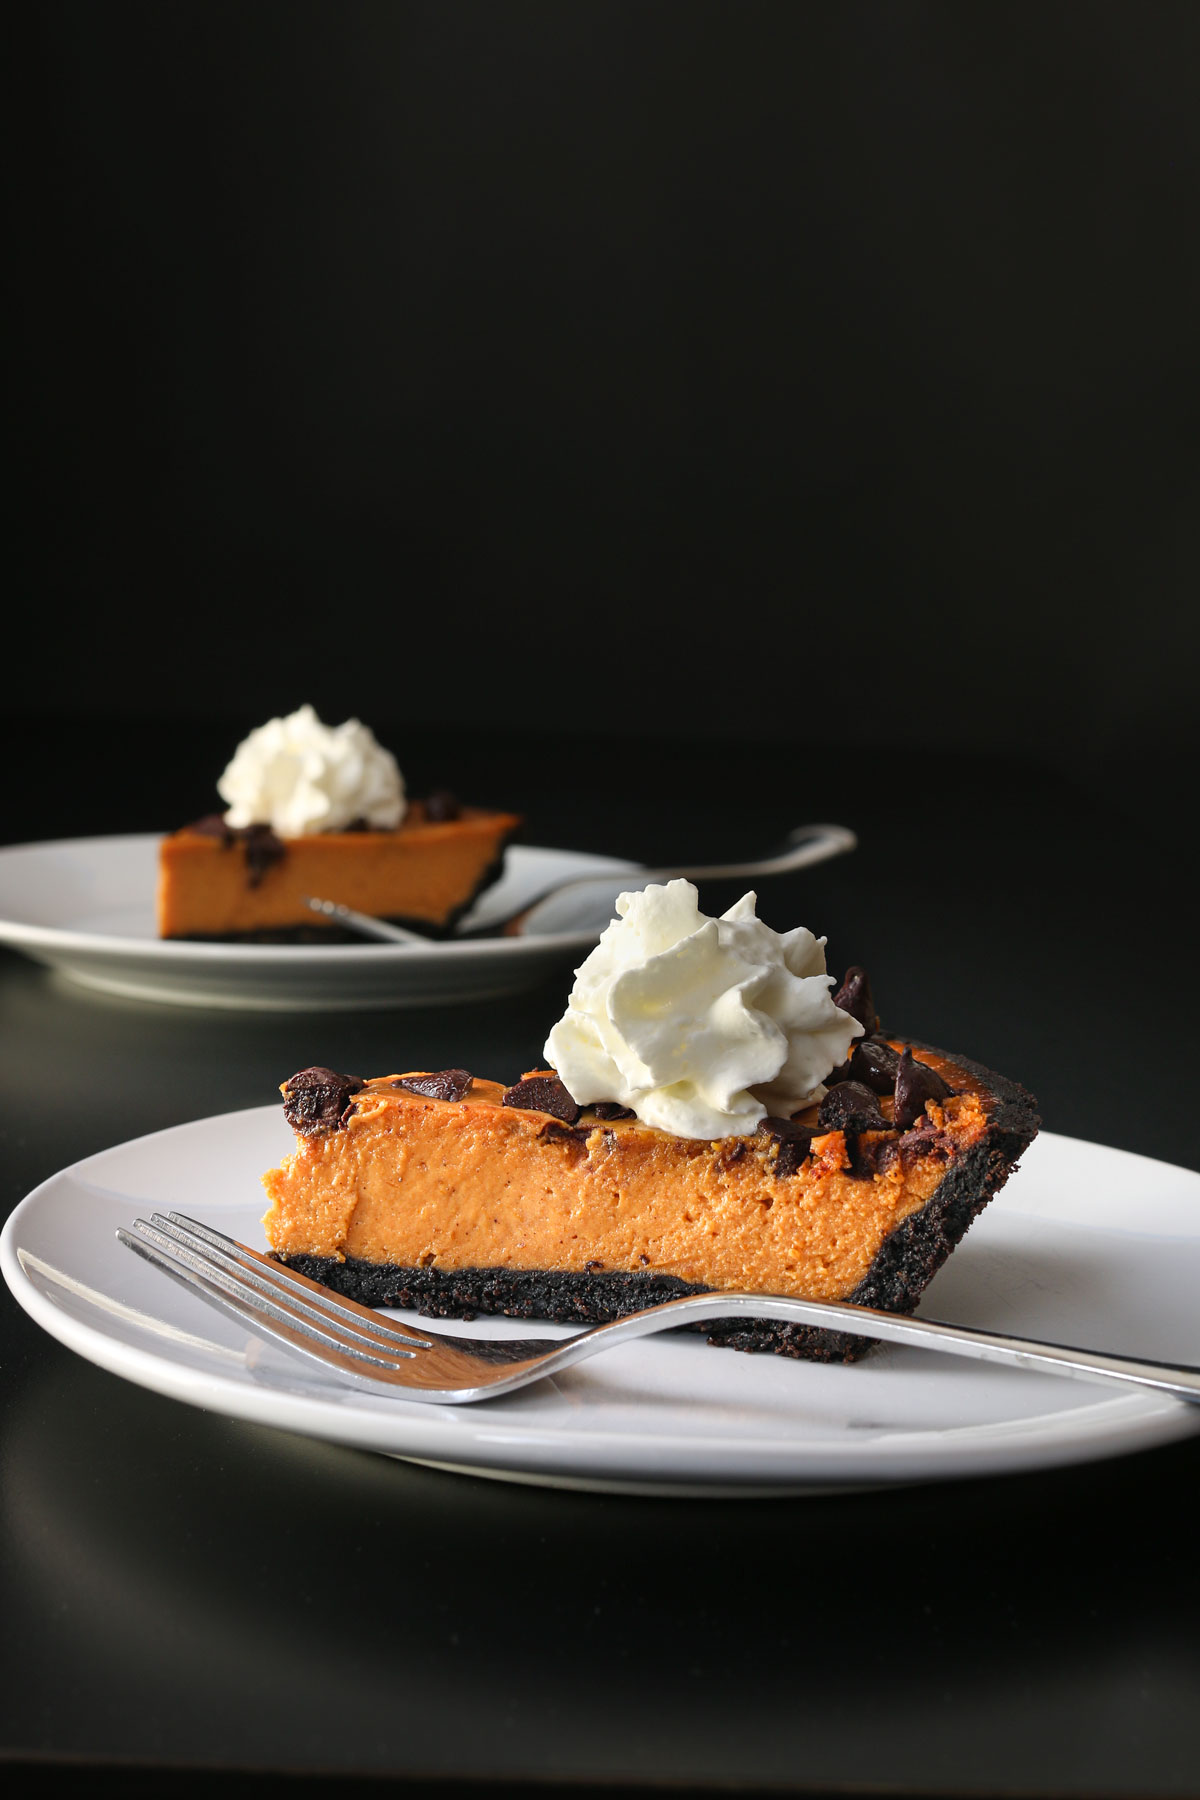 slices of pumpkin pie with chocolate crust and chocolate chips topped with fluffy whipped cream on plates with forks on a black table top with a black backdrop.